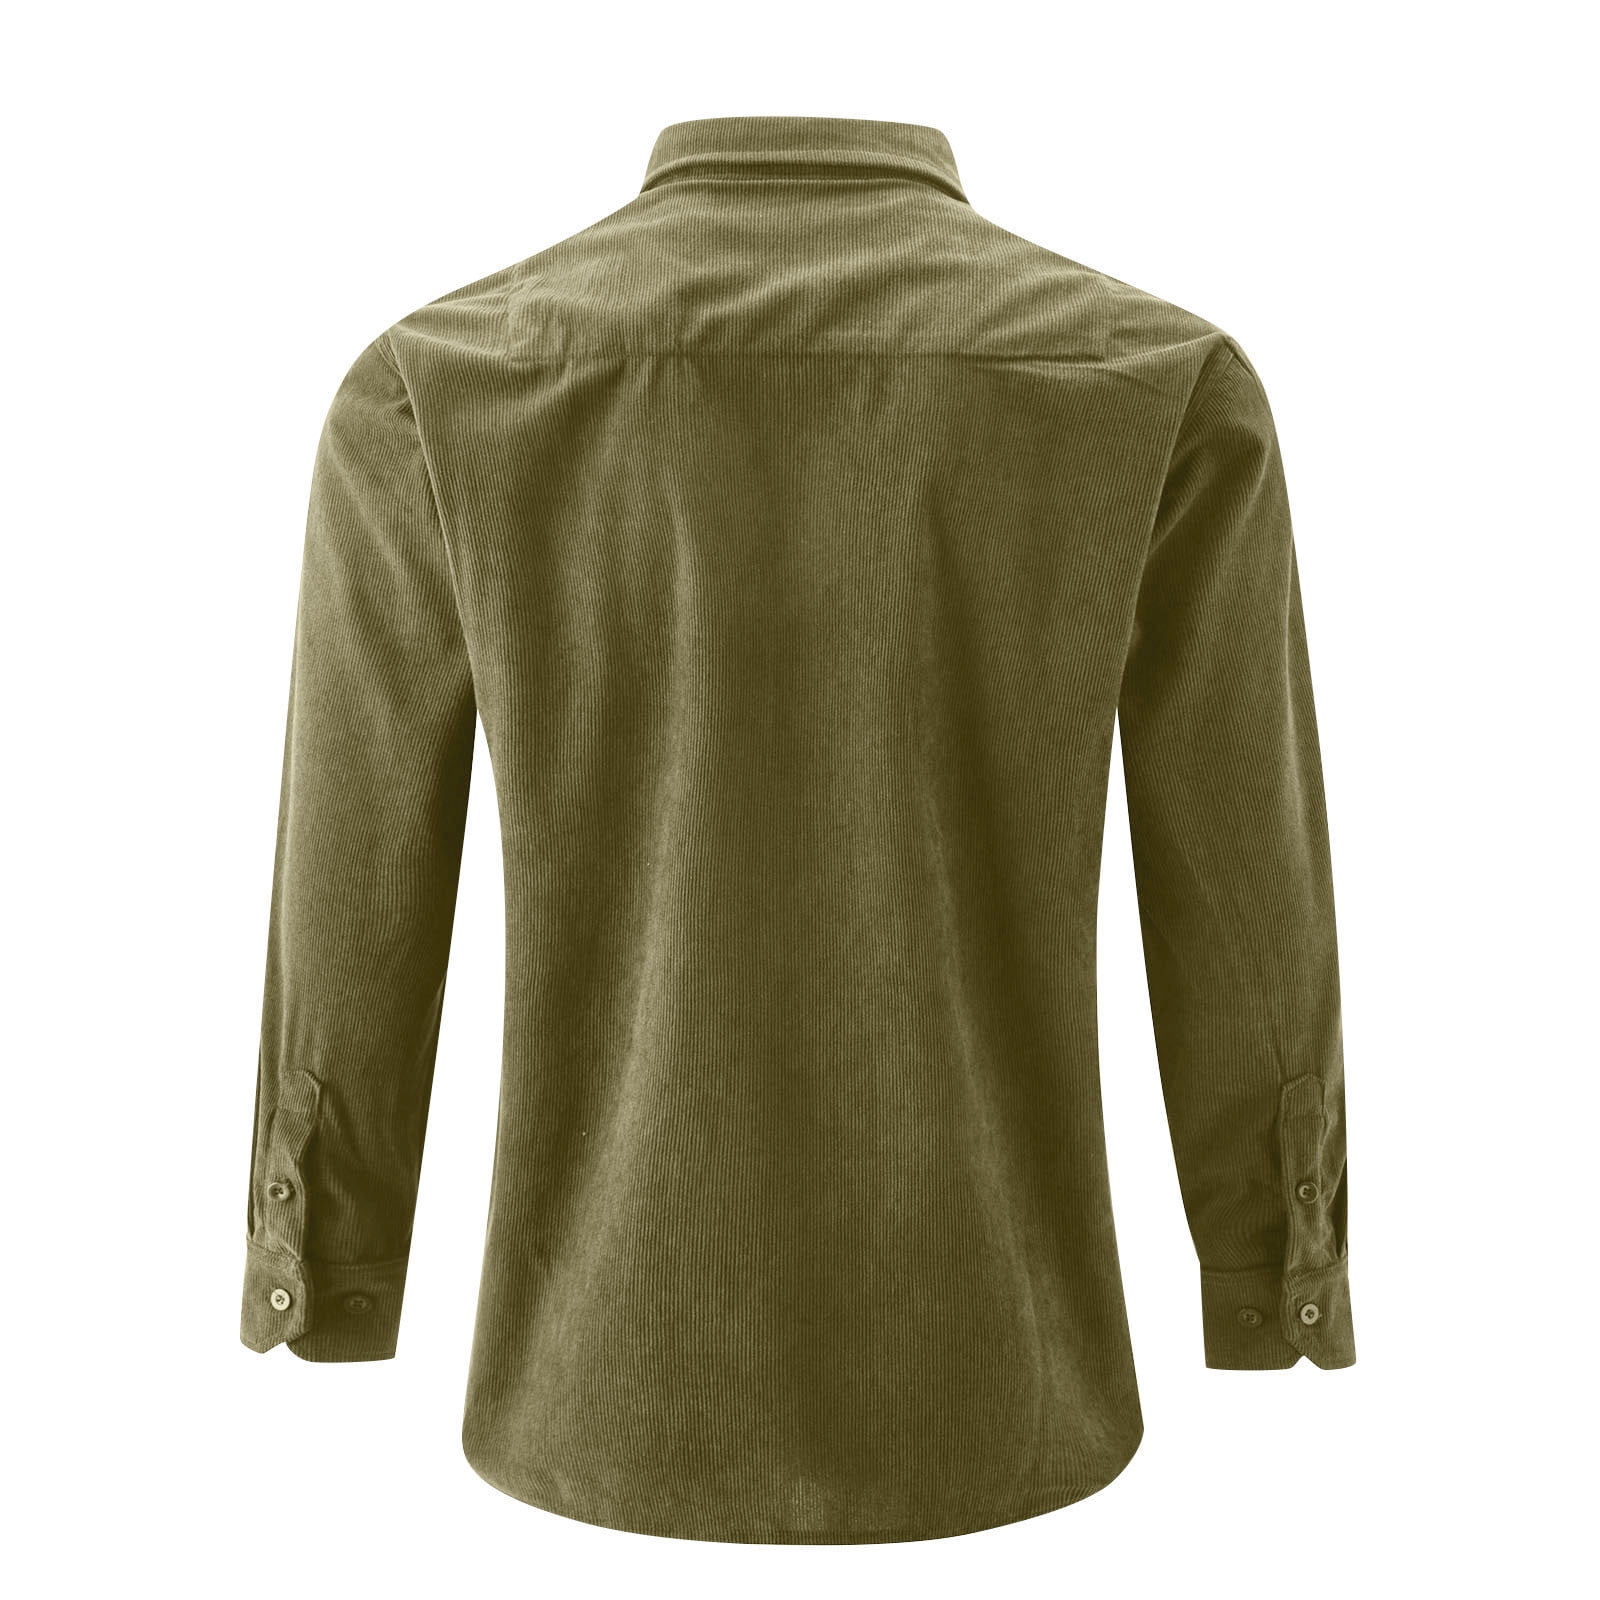 WREESH Mens Corduroy Shirts Solid Long Sleeve Button Down Shirt Soft  Breathable Top With Pockets Olive Green